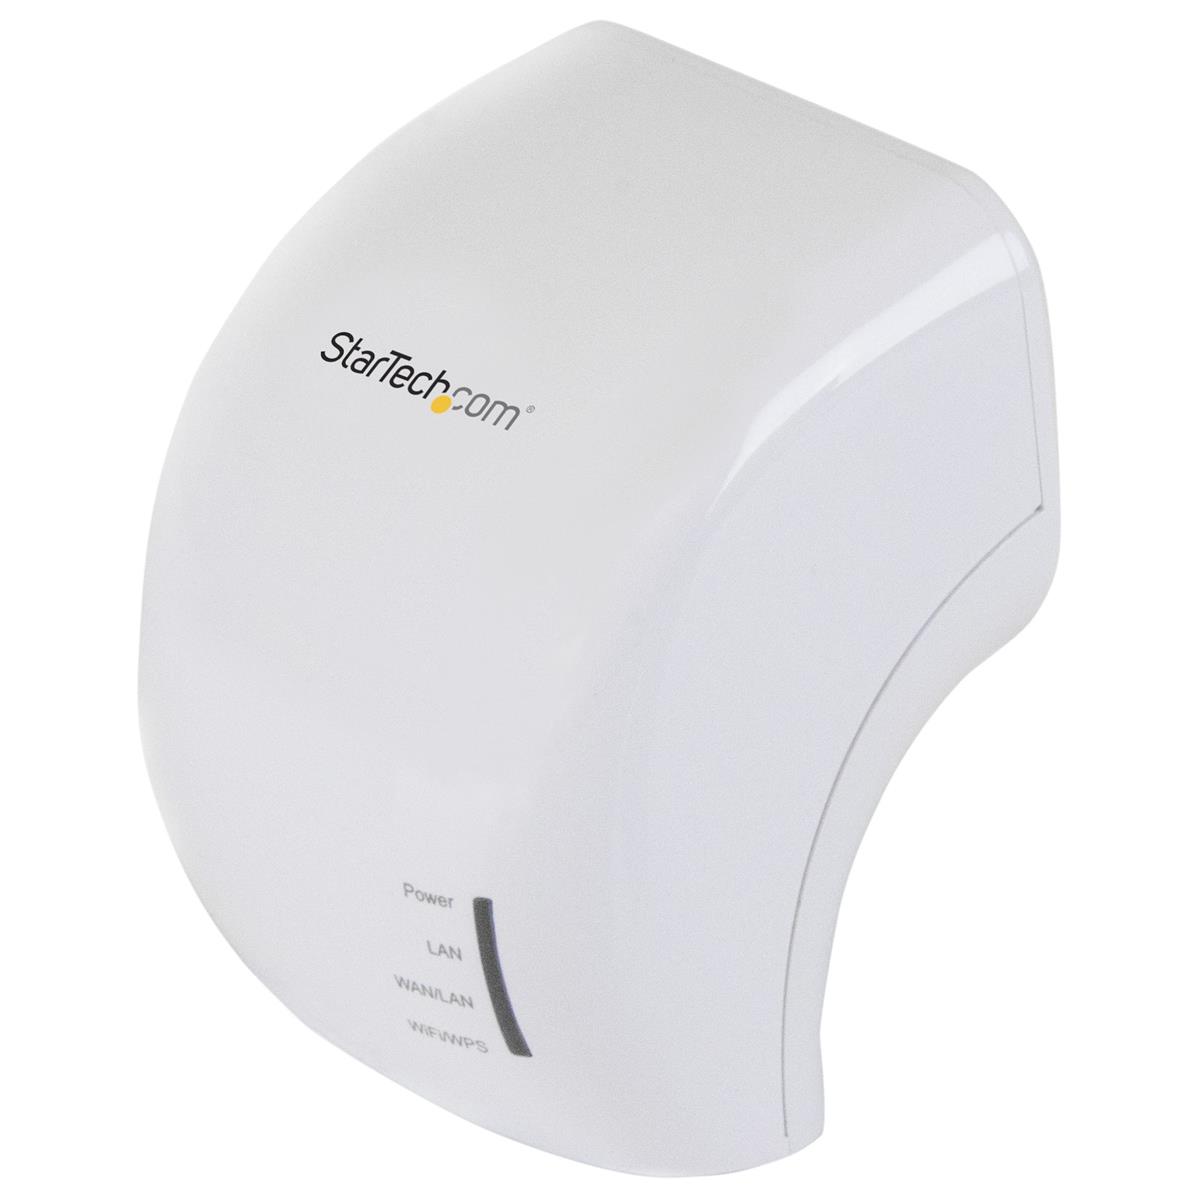 Image of StarTech AC750 Dual Band Wireless-AC Access Point